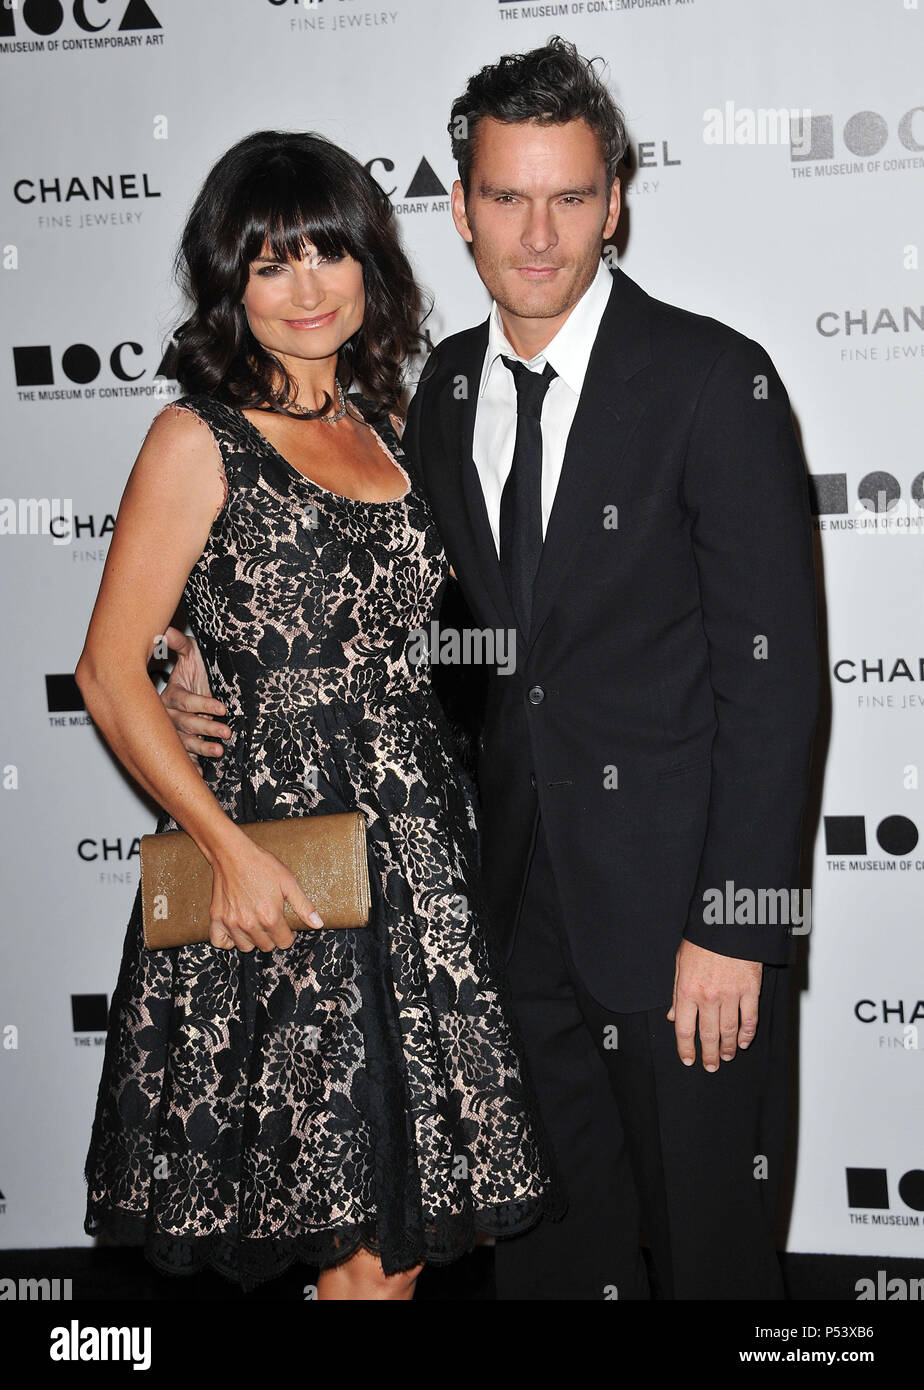 Balthazar Getty, Rosetta Getty - Moca Hapening Evening 2010 in Los  Angeles.Balthazar Getty, Rosetta Getty 070 Event in Hollywood Life -  California, Red Carpet Event, USA, Film Industry, Celebrities, Photography,  Bestof, Arts